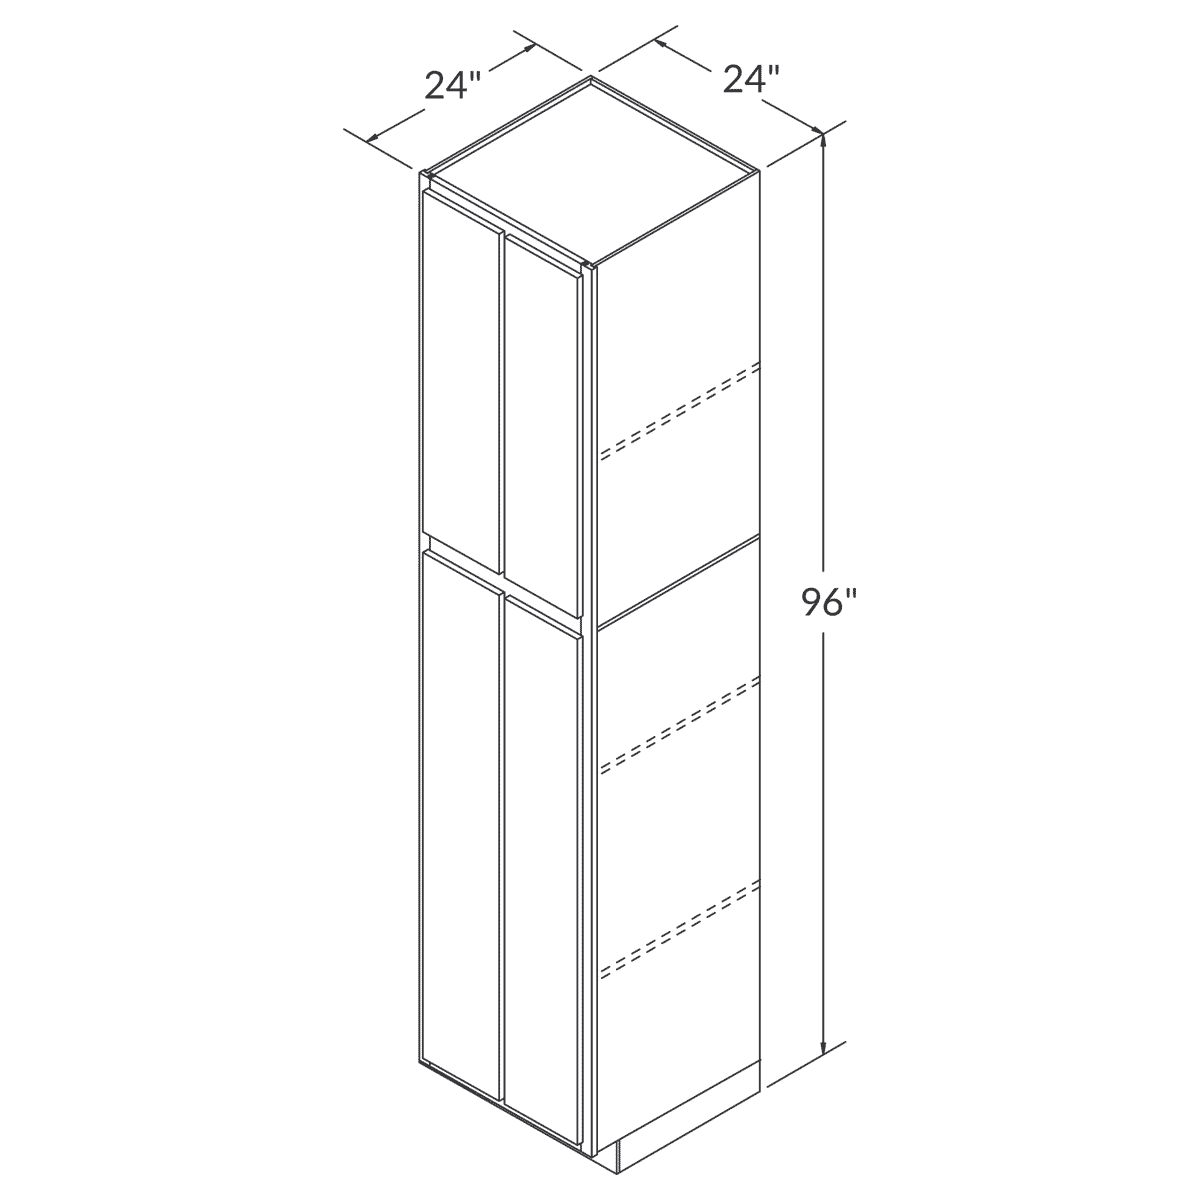 Cubitac Imperial Madison Midnight Tall Pantry 24"W x 96"H Assembled Cabinet Wireframe